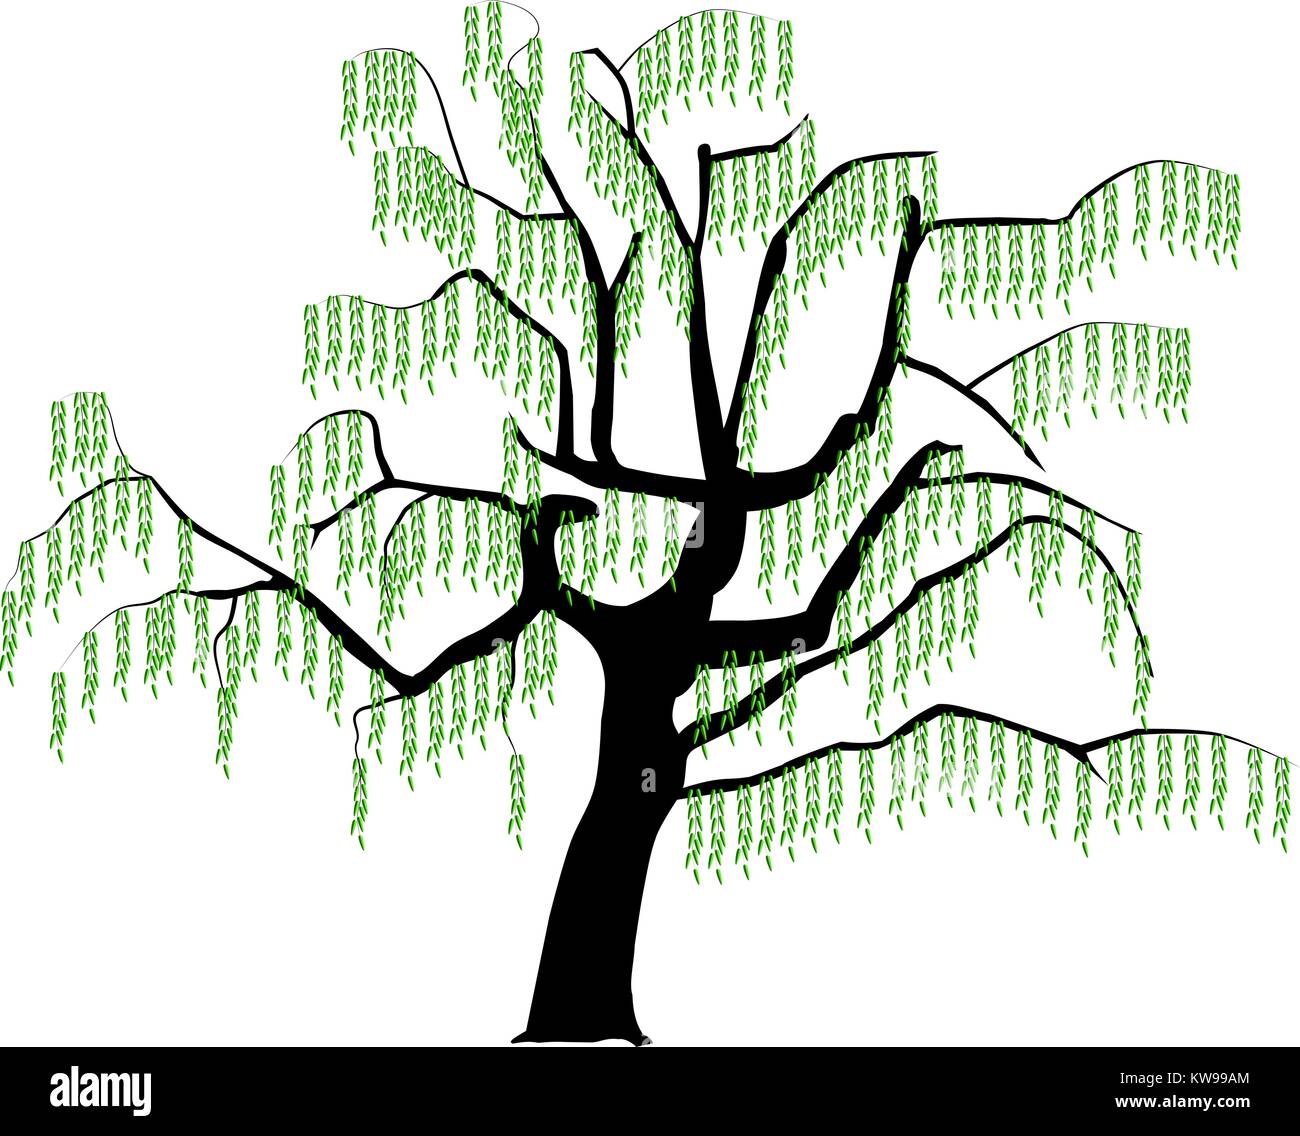 vector image of a tree in spring Stock Vector